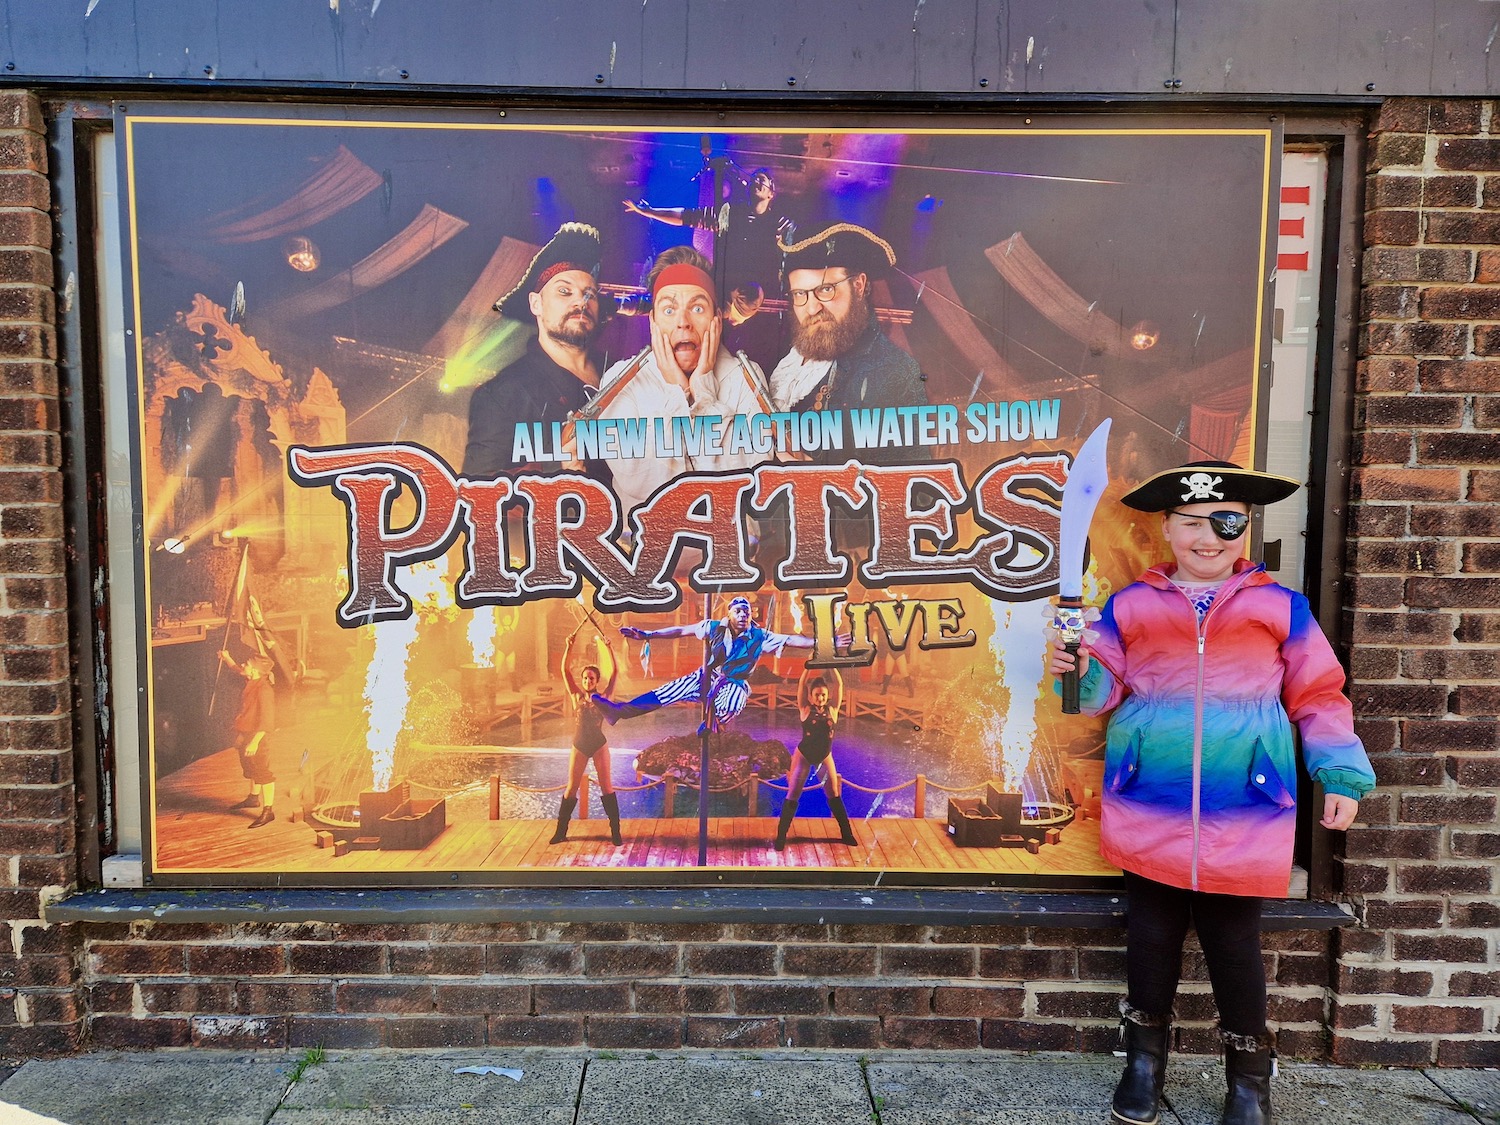 Great Yarmouth Hippodrome Pirates Live advertising board